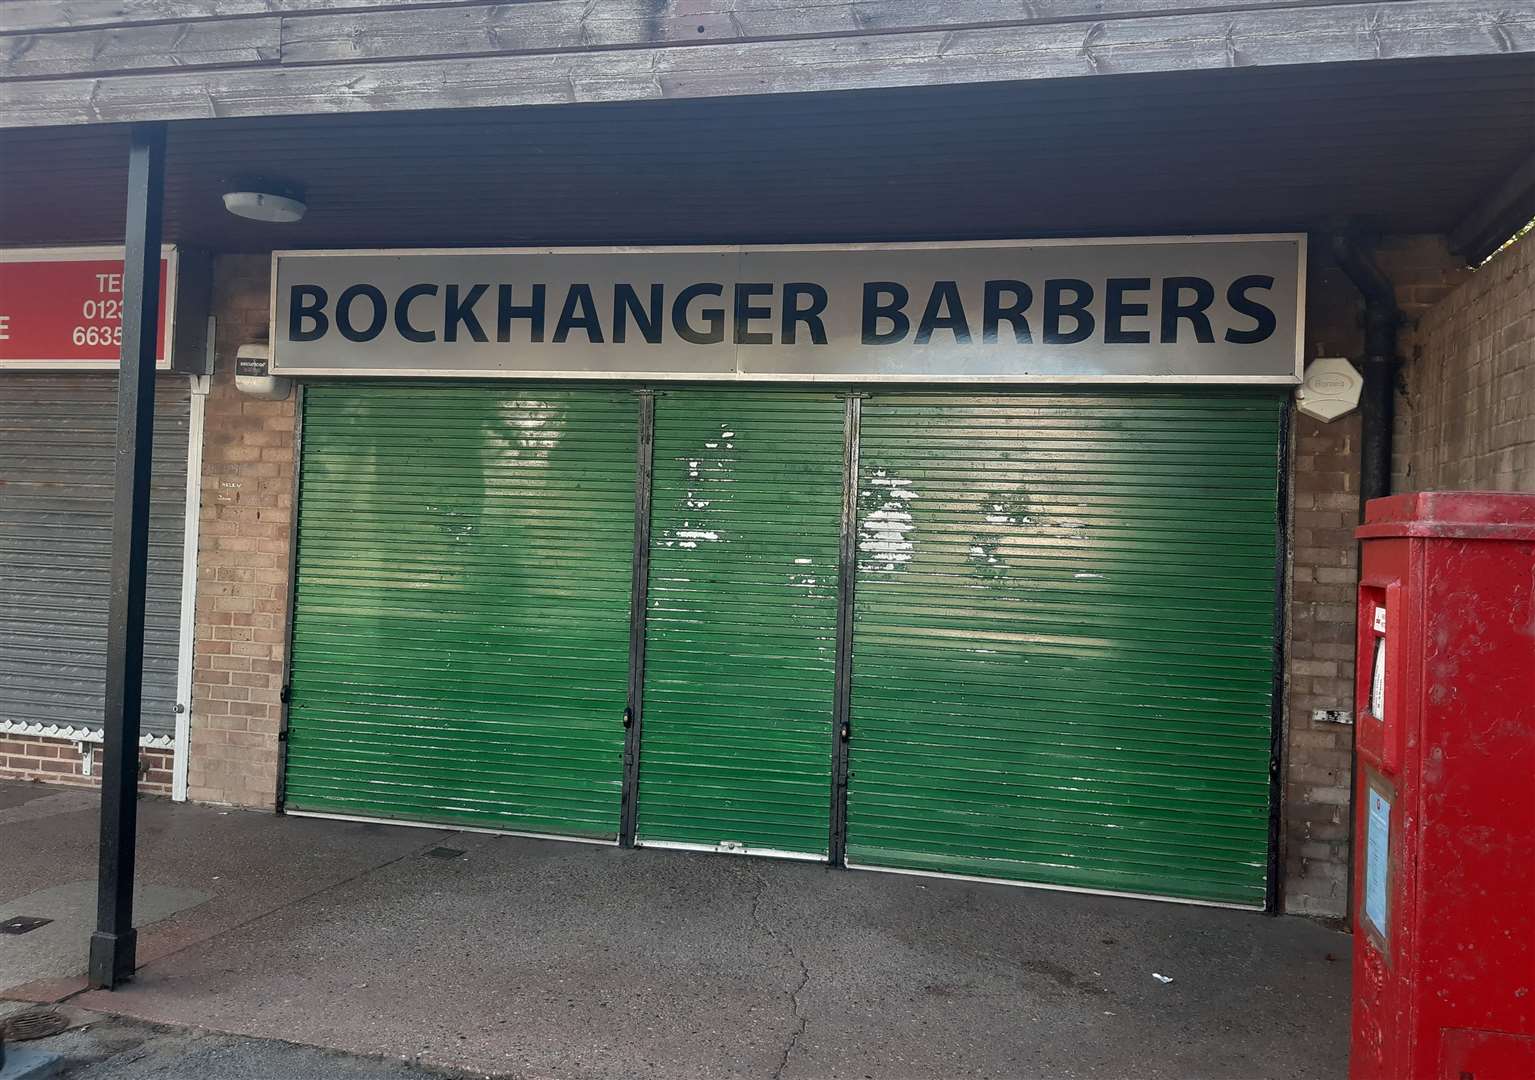 Bockhanger Post Office has now become a barber shop